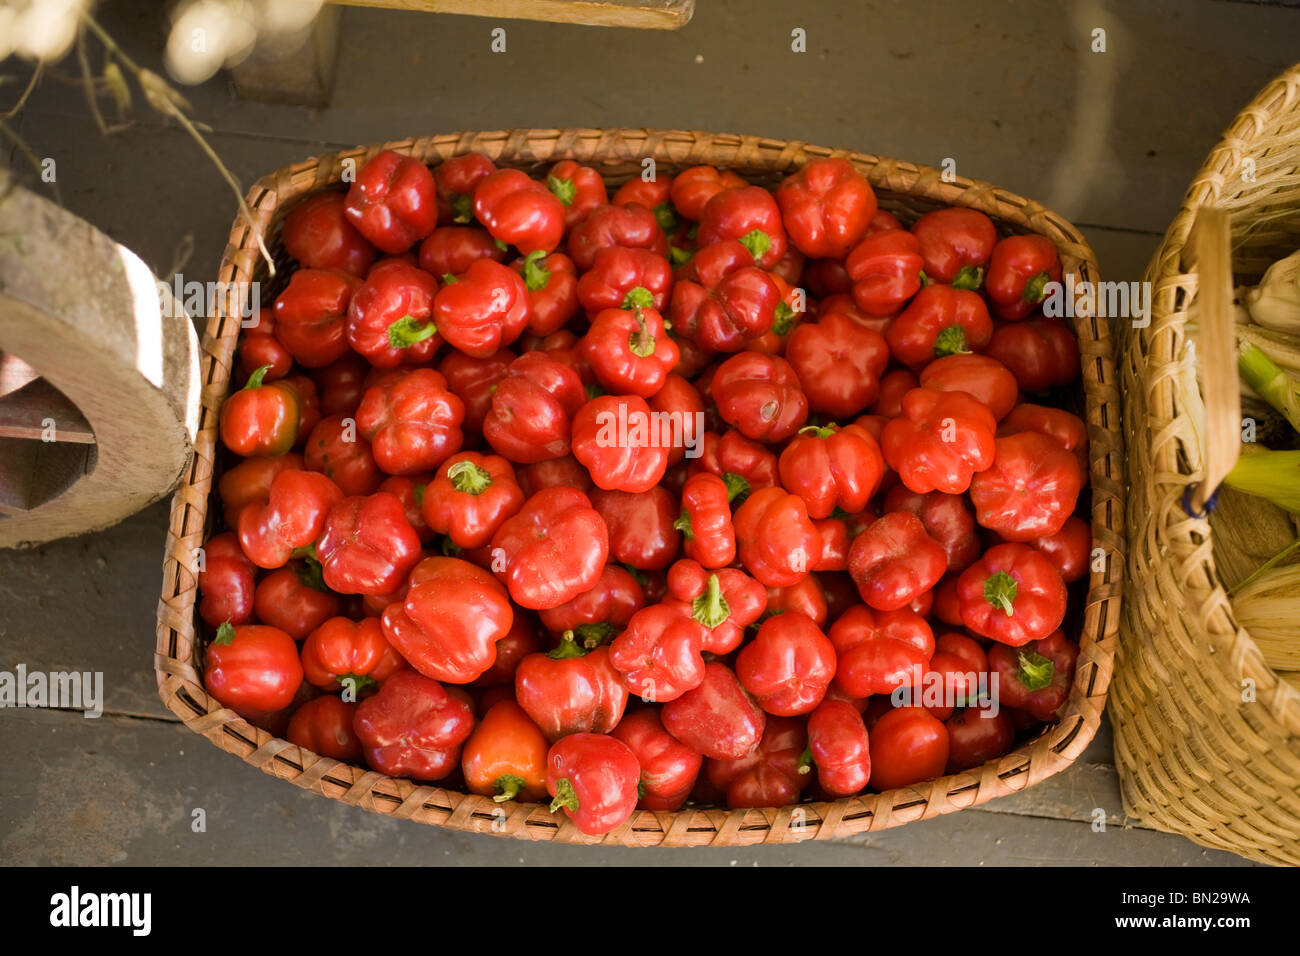 A Shaker style basket is filled with red peppers from the fall harvest. Stock Photo